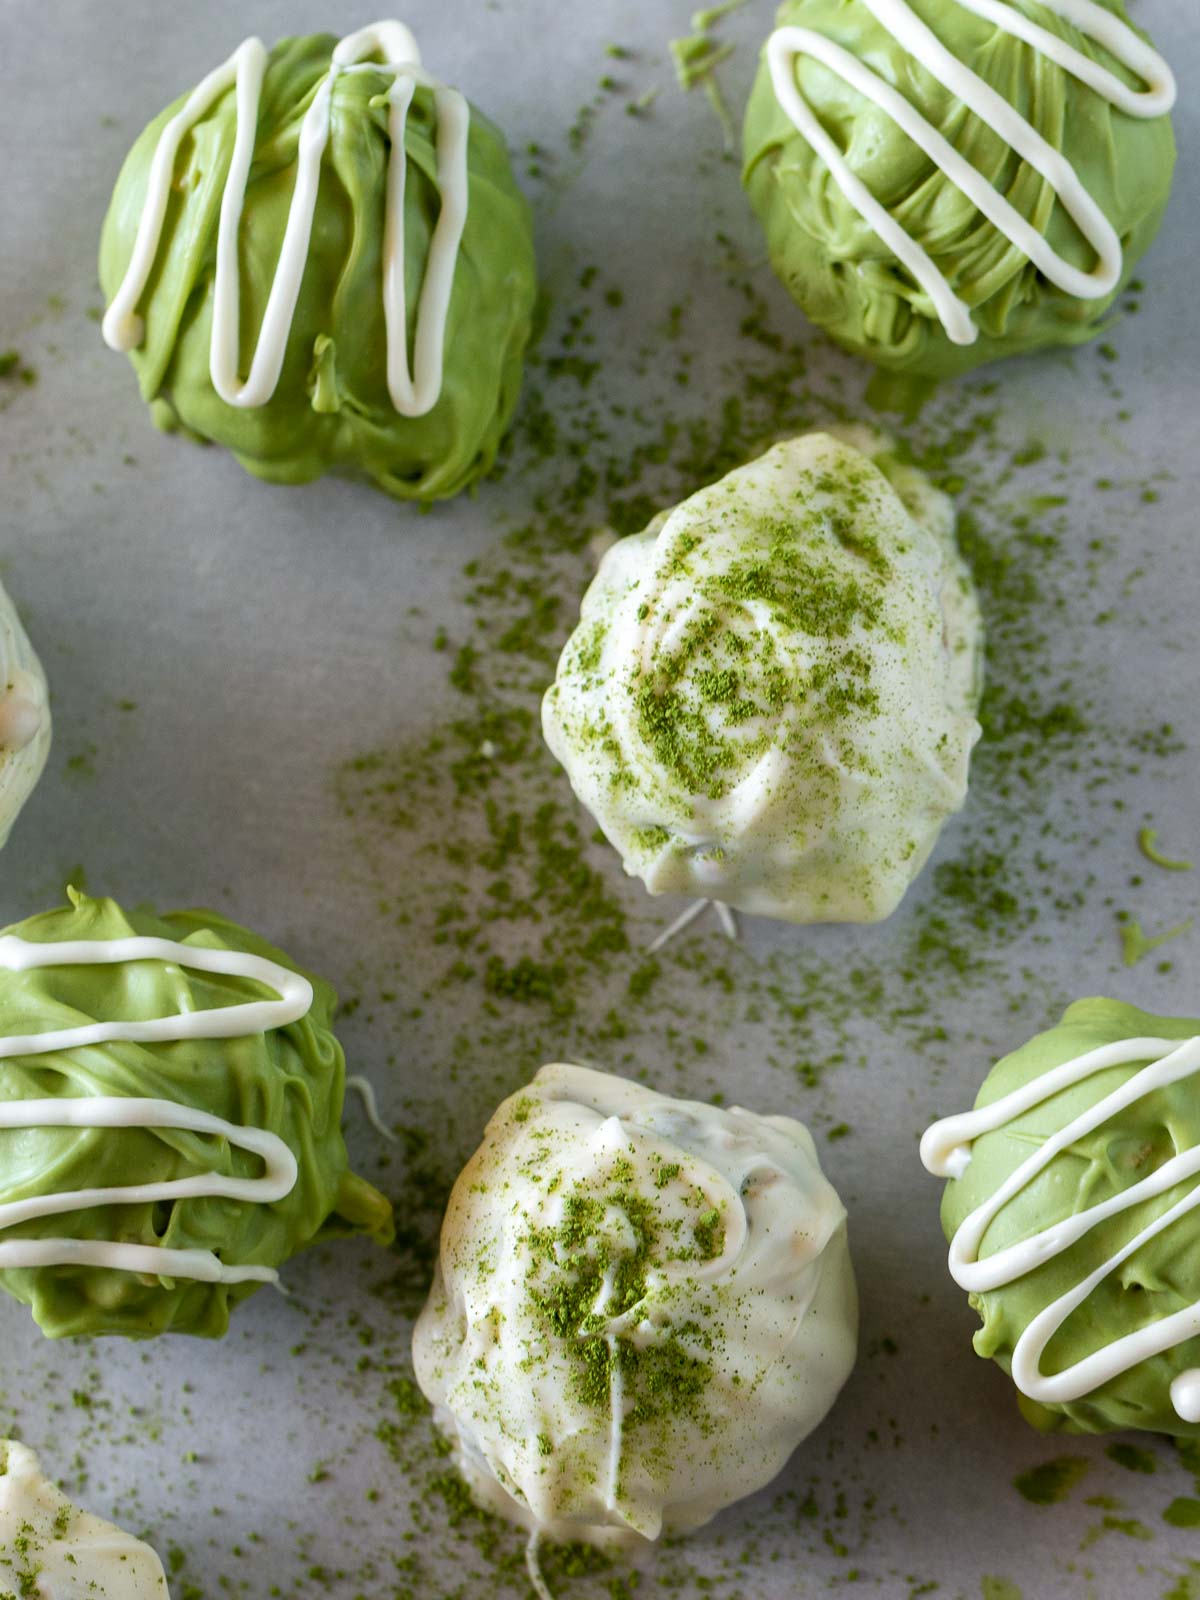 Decorated Matcha chocolate balls just dusted with matcha powder on a baking sheet.